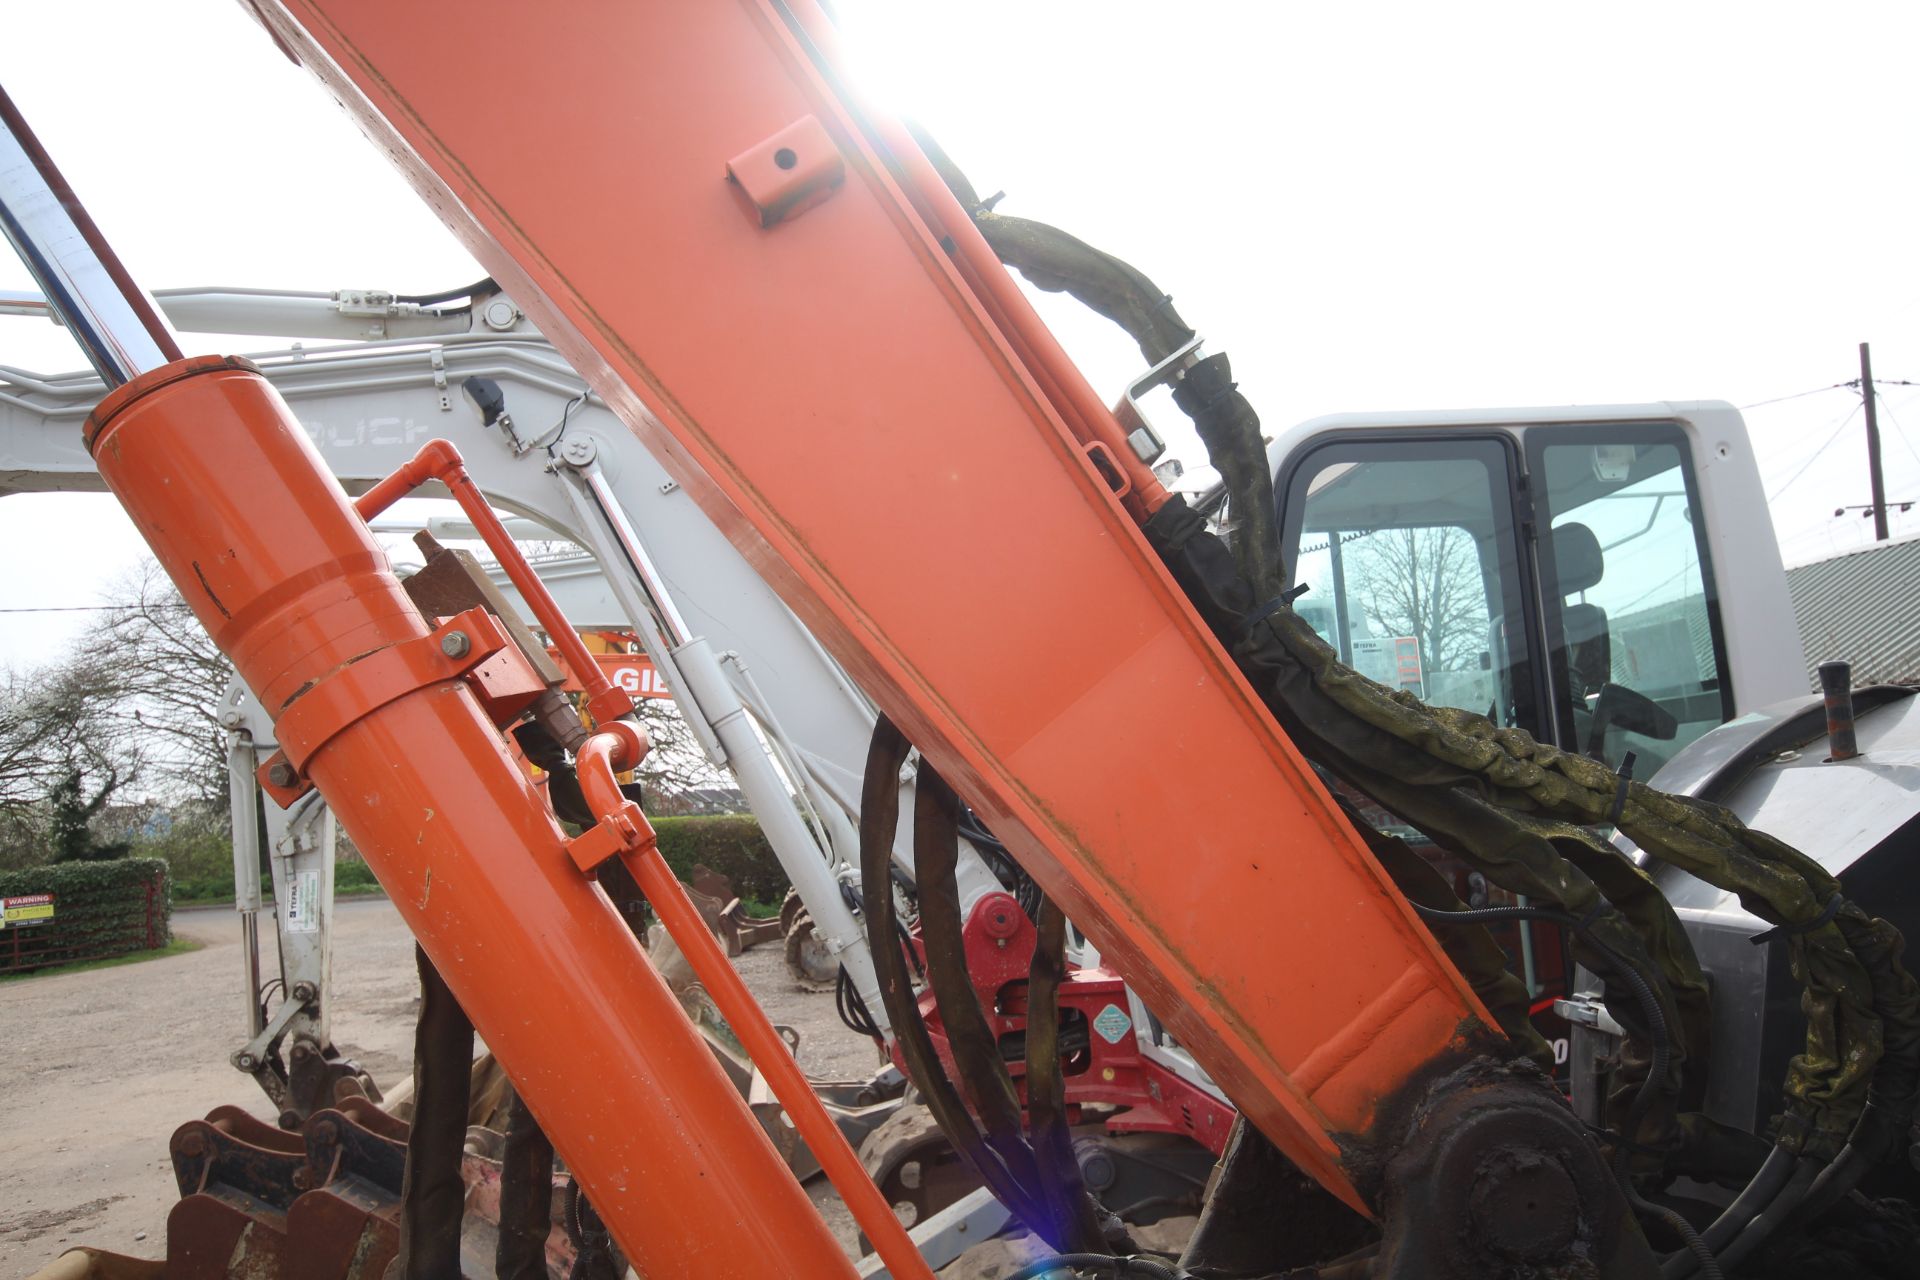 Hitachi Z-Axis 85-USB-5A 8.5T rubber track excavator. 2016. 4,704 hours. Serial number HCM DEE50K - Image 41 of 75